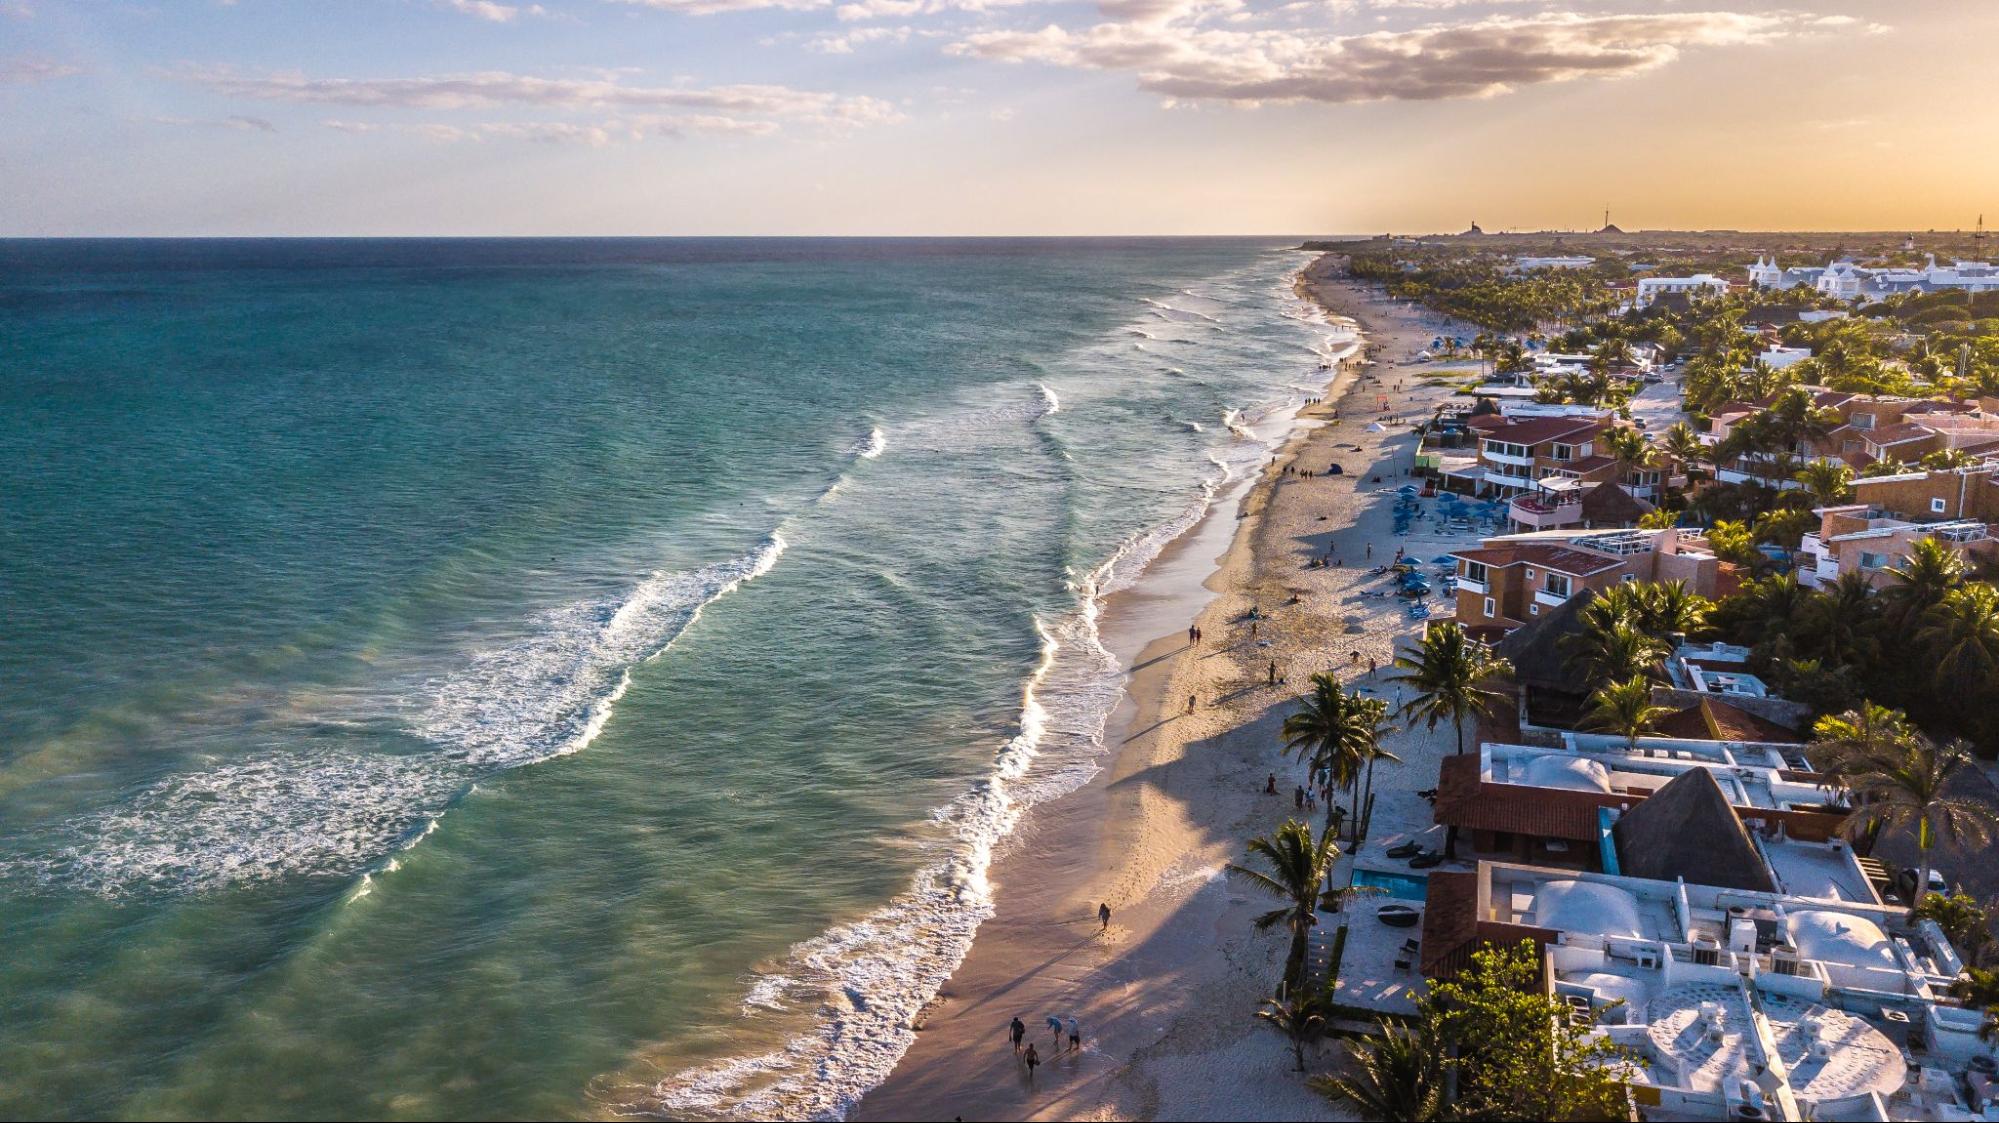 10 Safest Places To Visit In Mexico - CabinZero